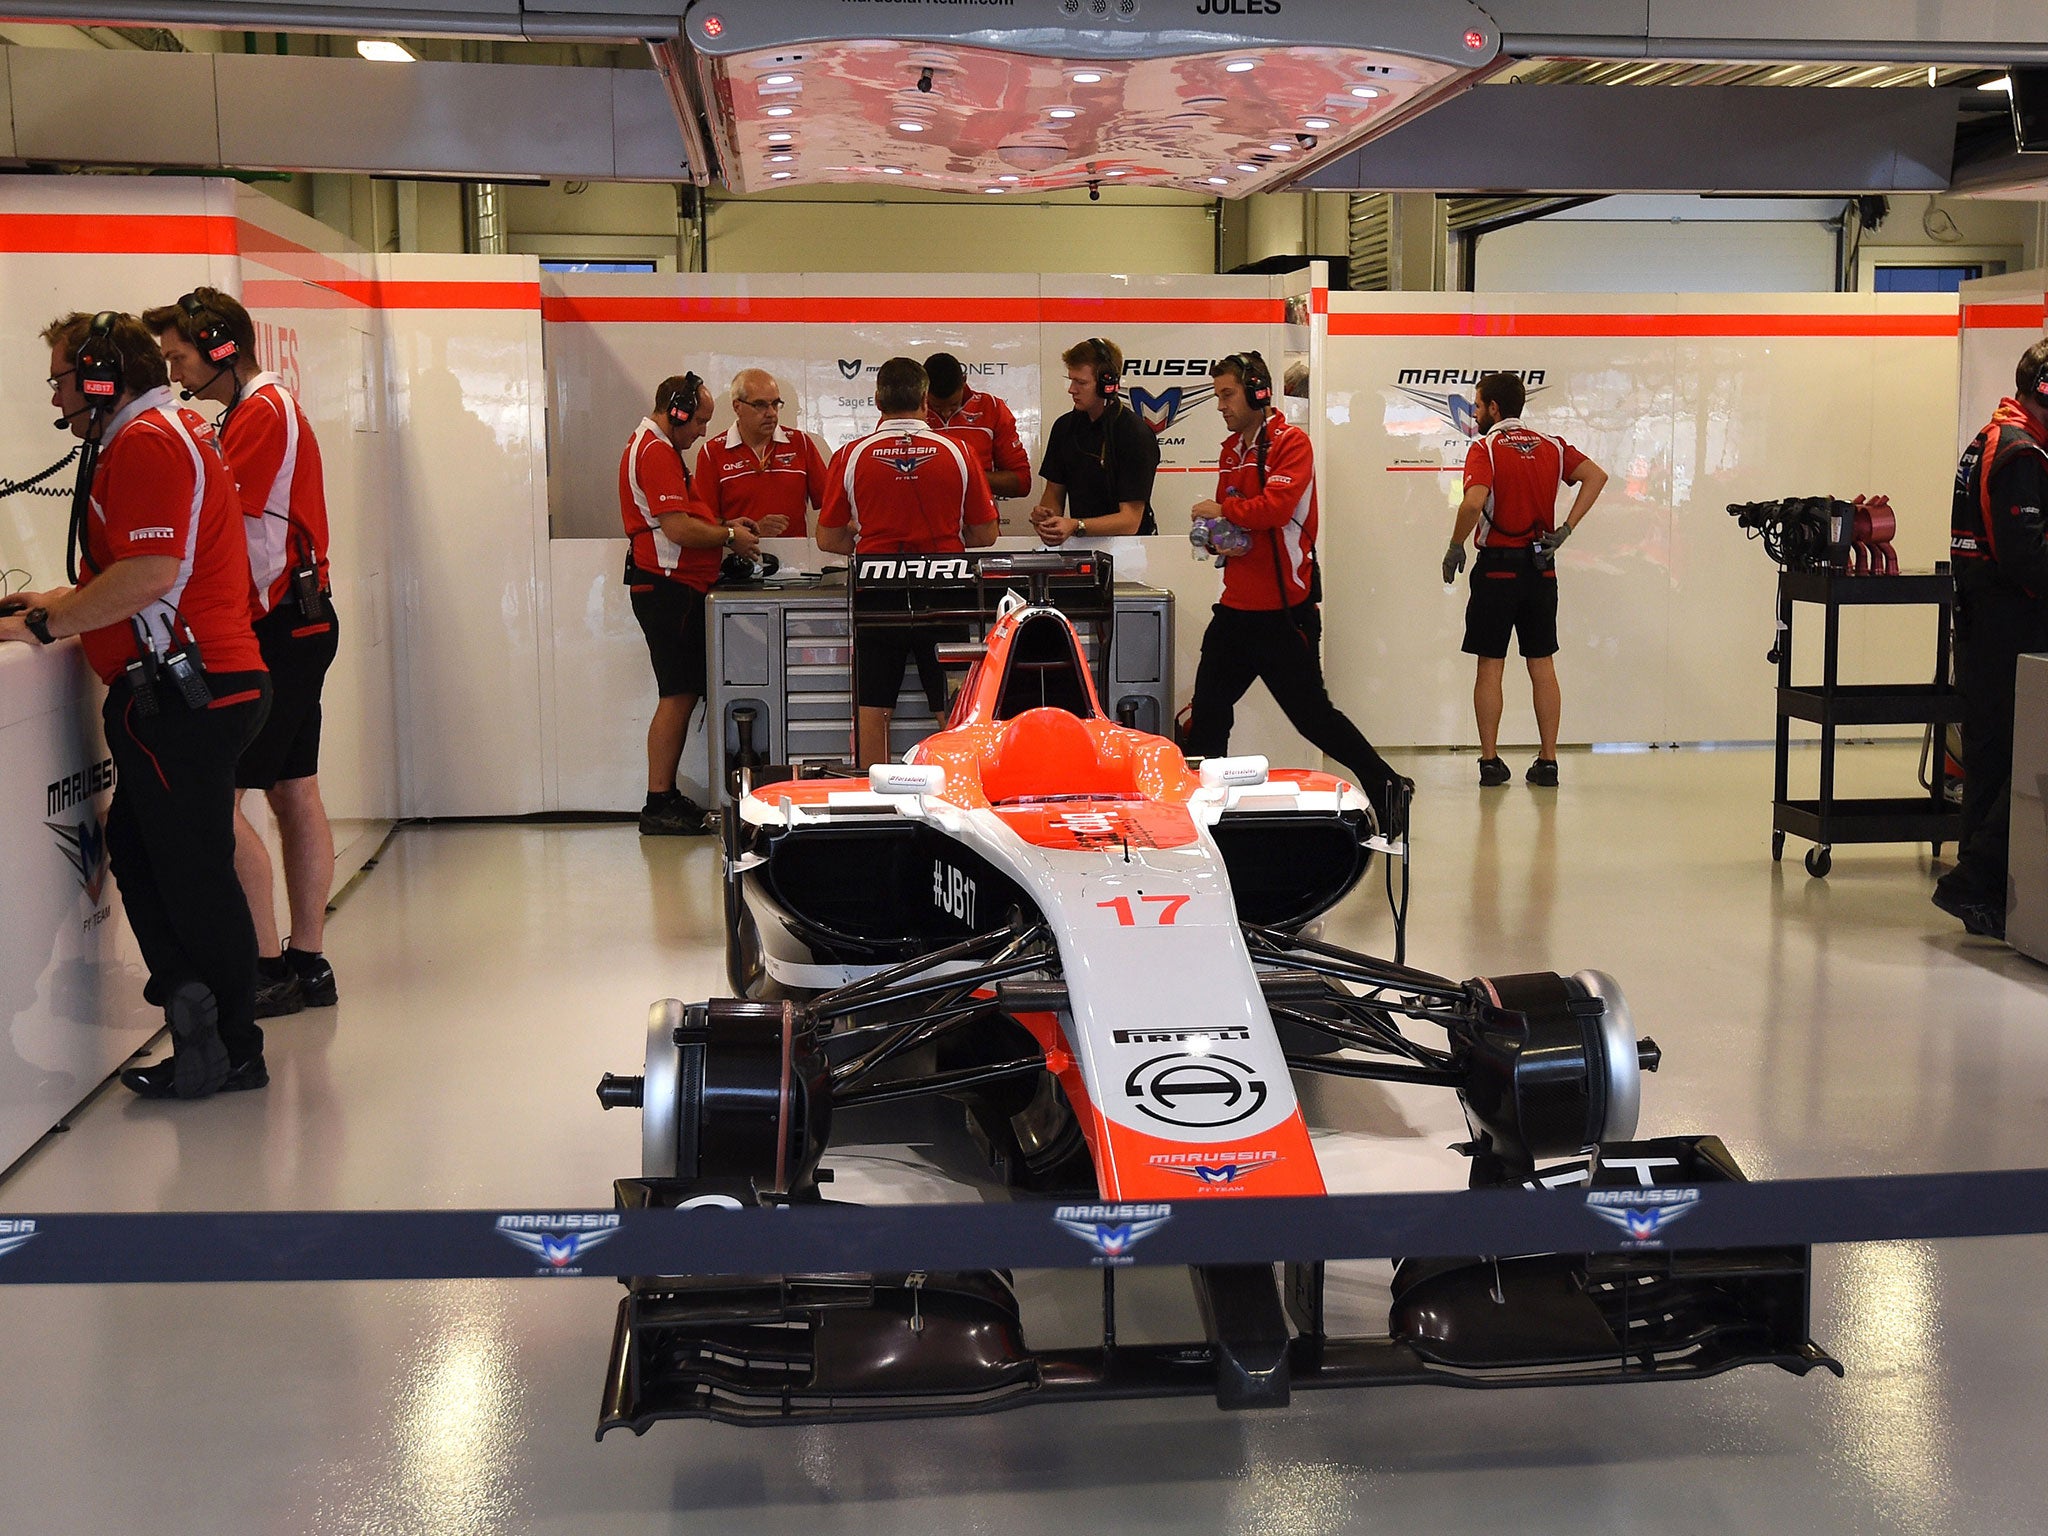 Marussia mechanics and engineers stand behind Jules Bianchi's No 17 car in Sochi